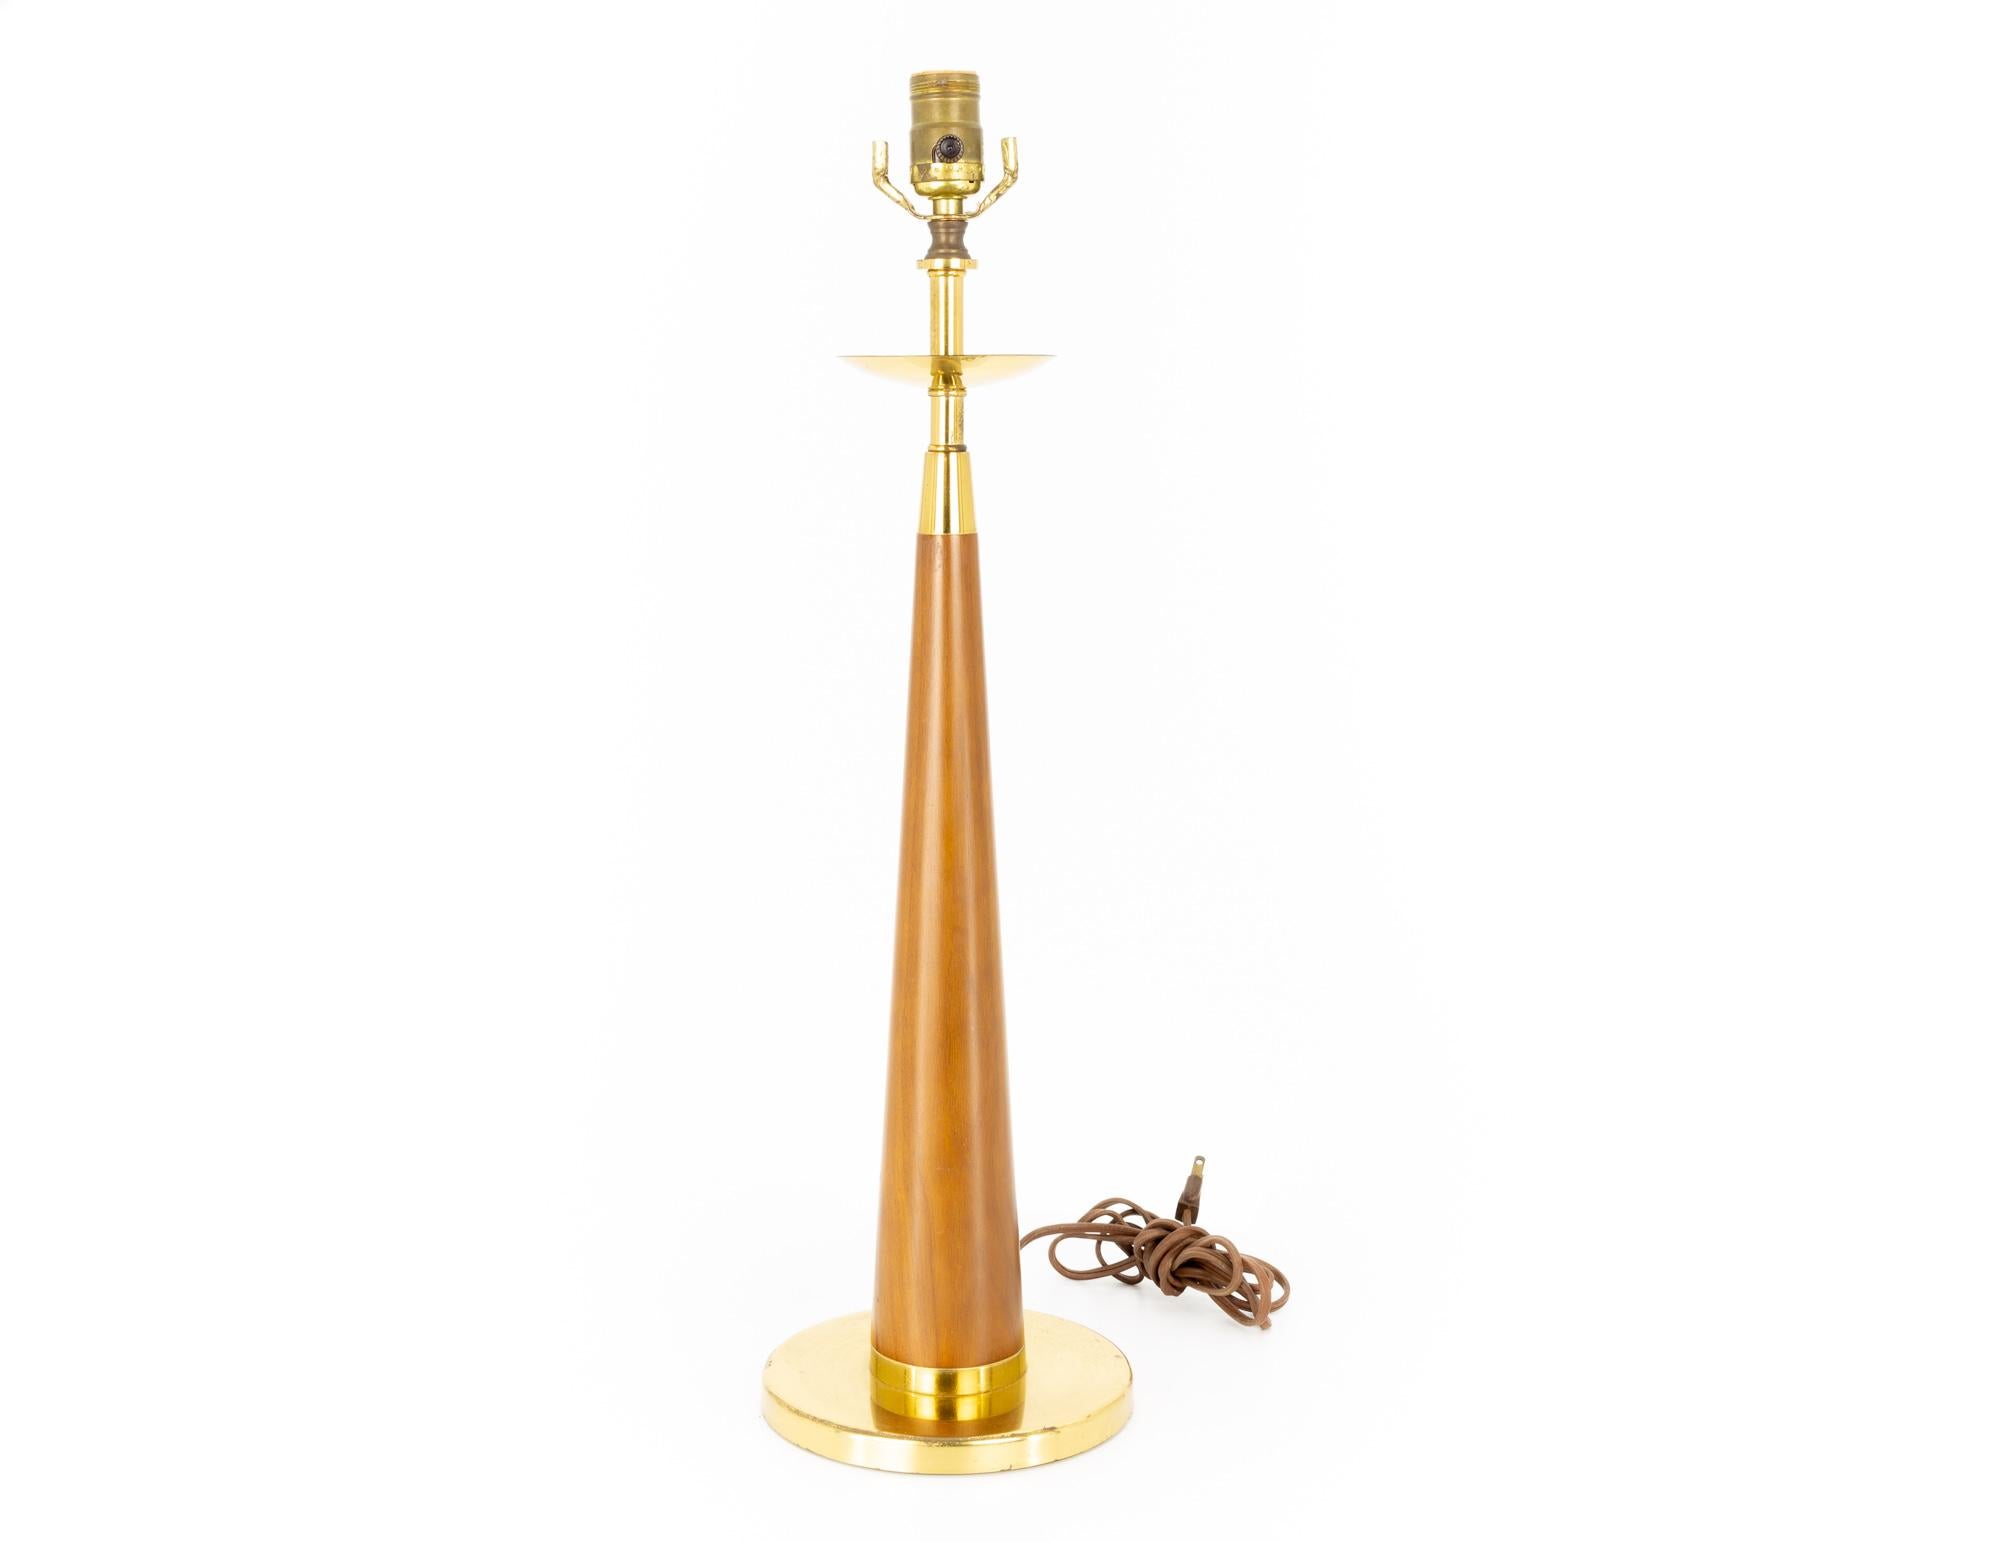 Mid-century teak and brass cone shaped table lamp.

This lamp measures: 7 wide x 7 deep x 24.5 inches high.

This lamp is in great vintage condition with some minor marks, dents, and wear.

We take our photos in a controlled lighting studio to